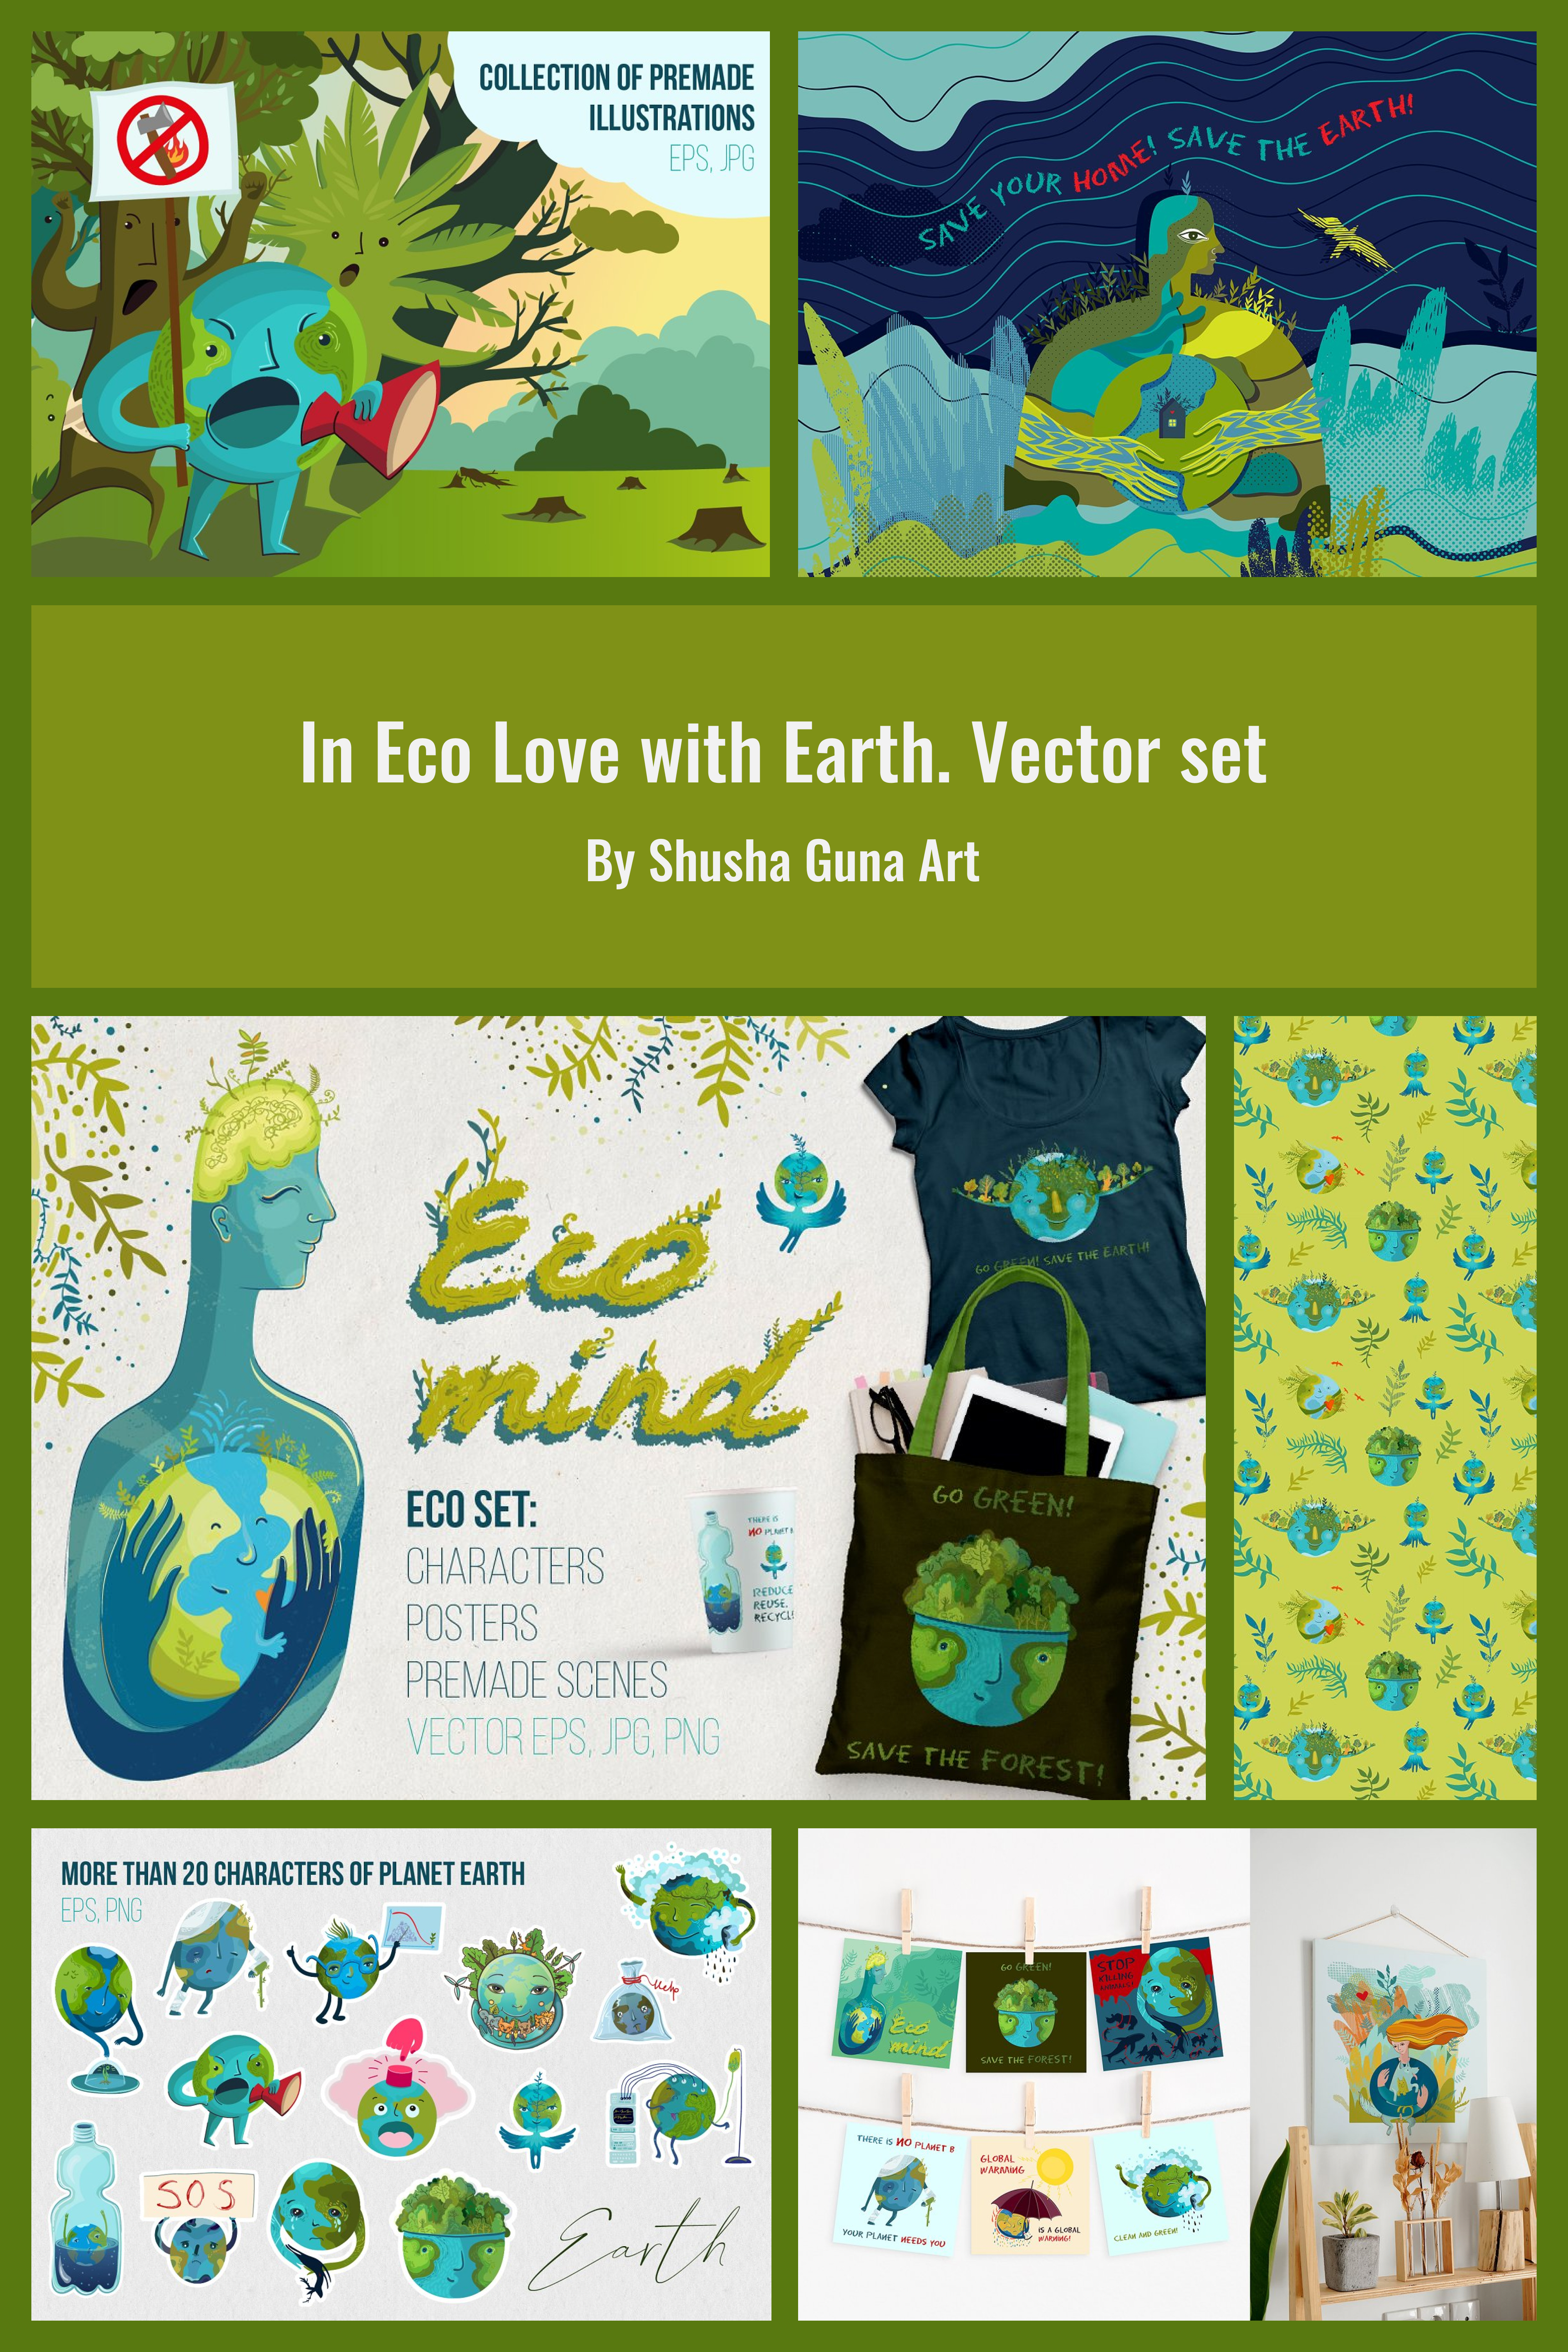 In eco love with earth vector set of pinterest.